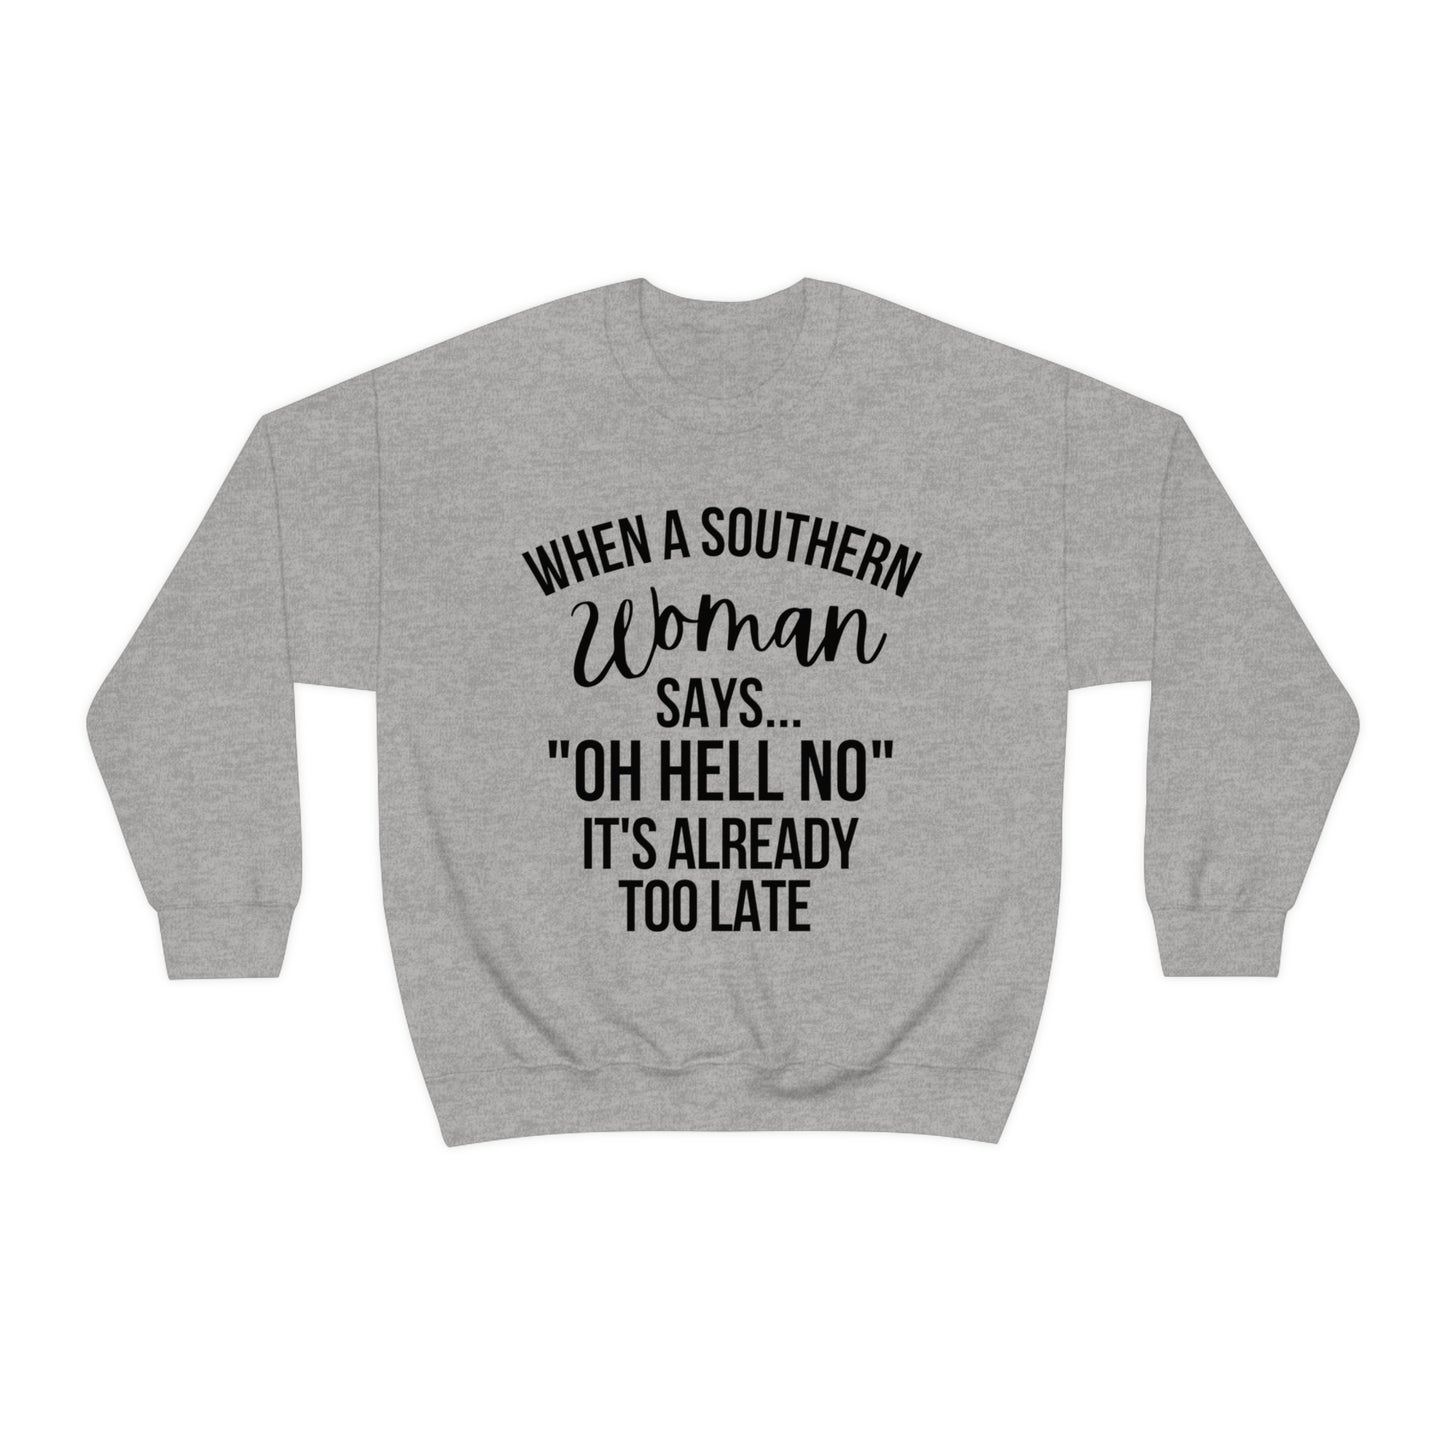 When A Southern Woman Say "OH HELL NO" It's Already Too Late Crewneck Sweatshirt